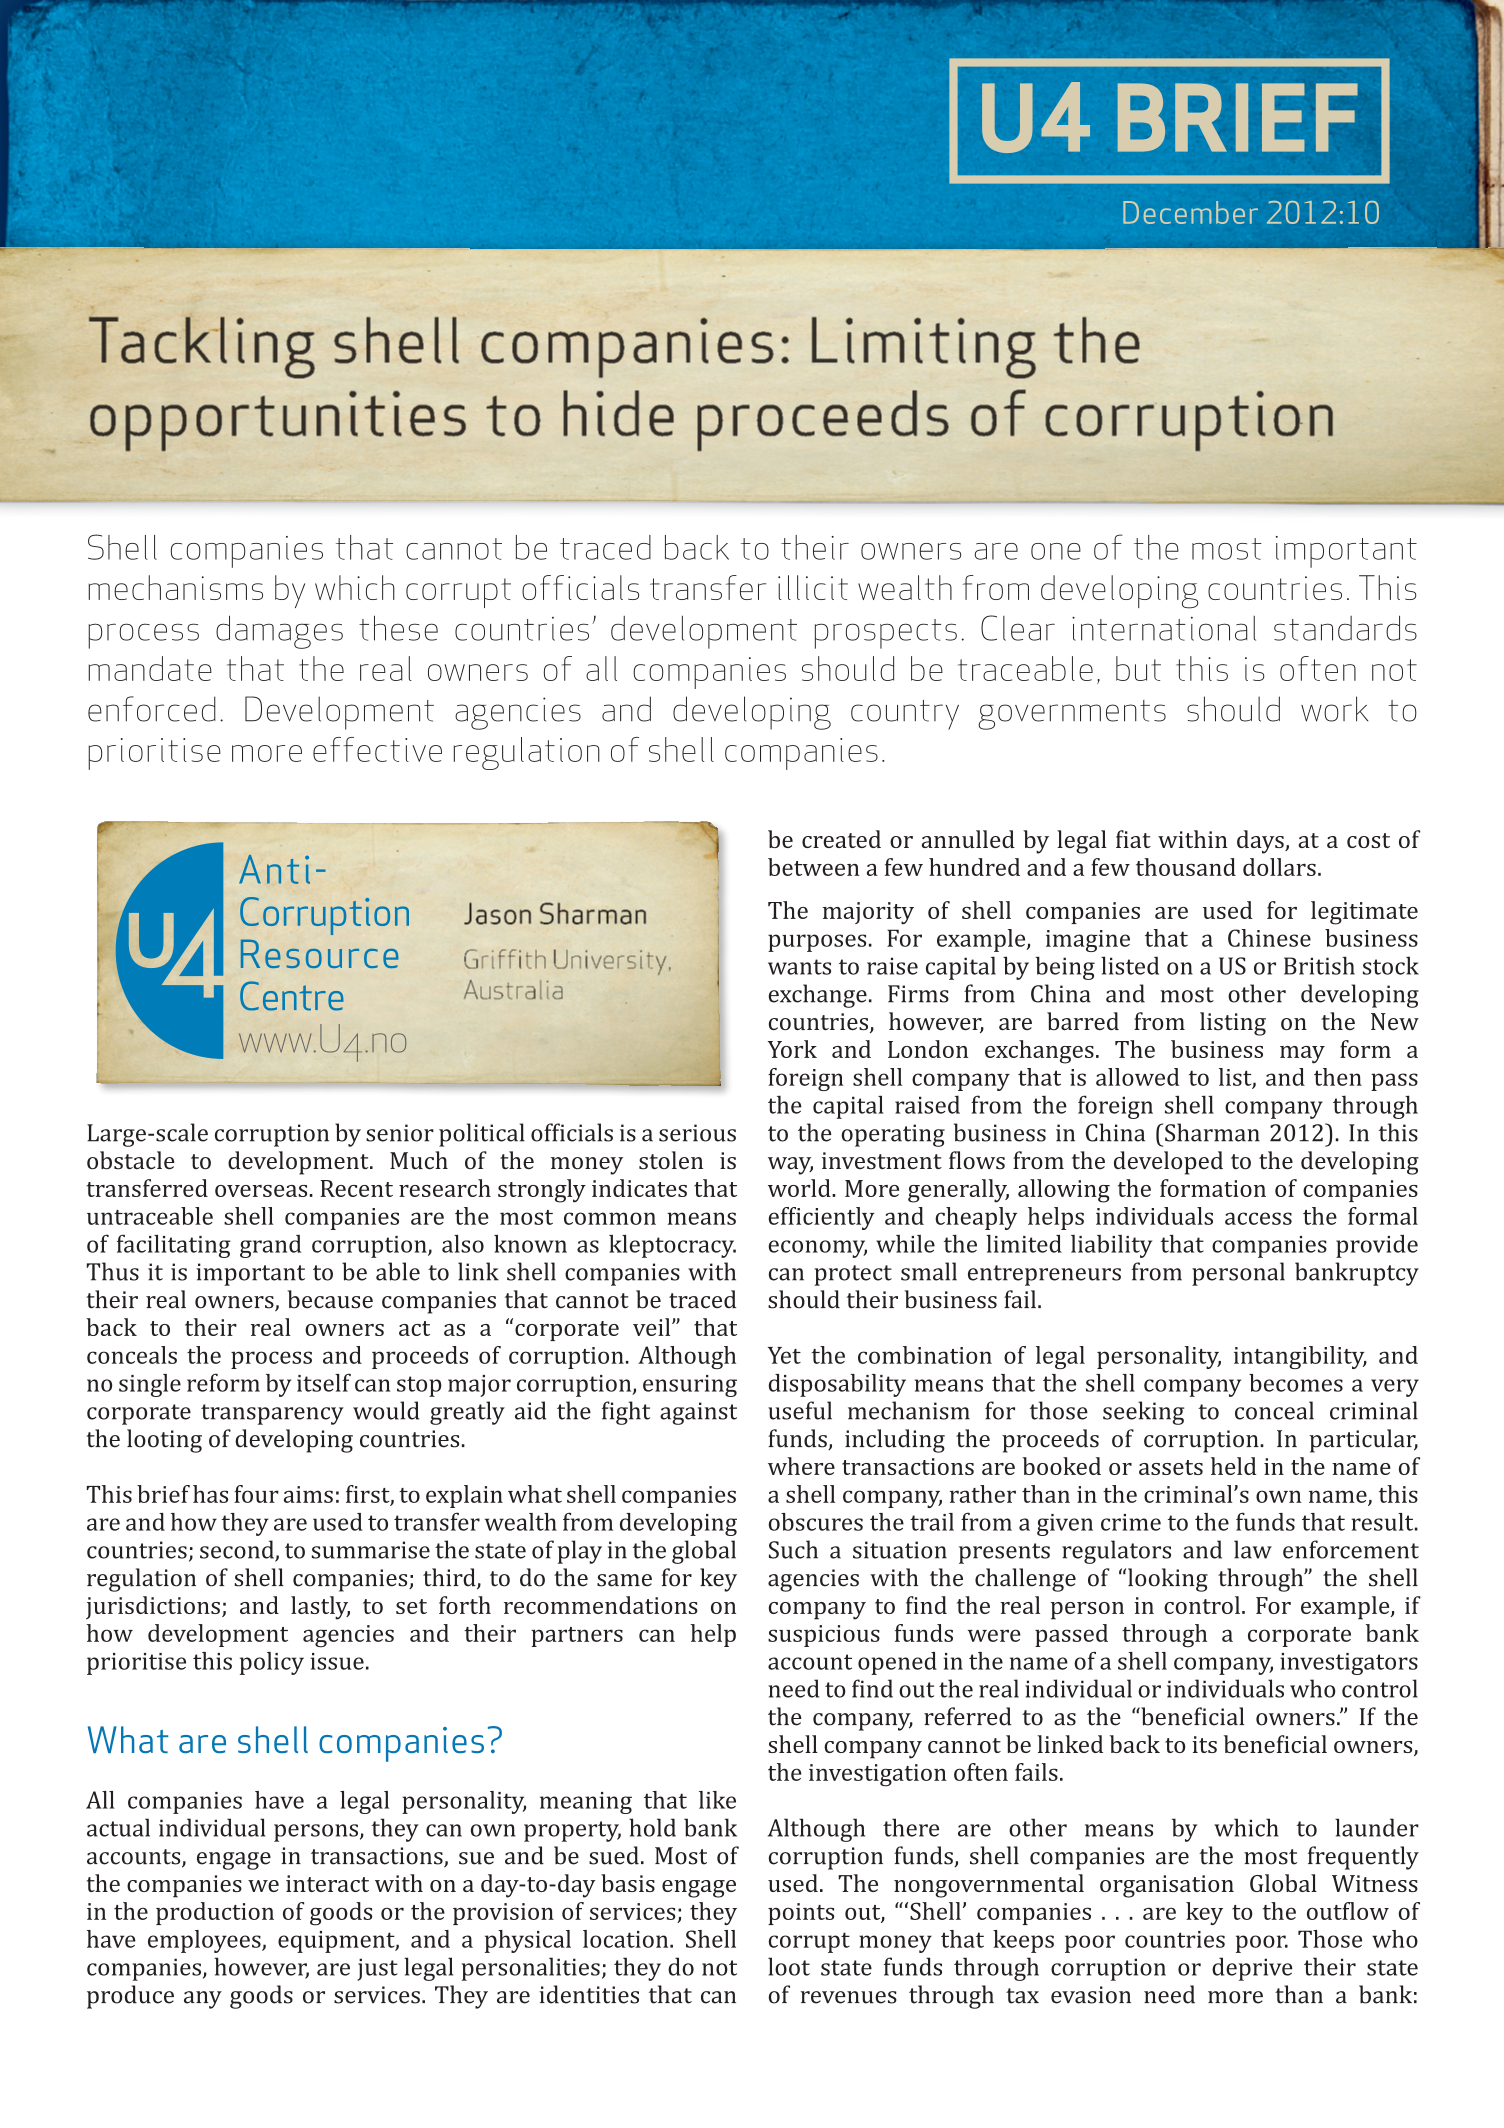 Tackling shell companies: Limiting the opportunities to hide proceeds of corruption